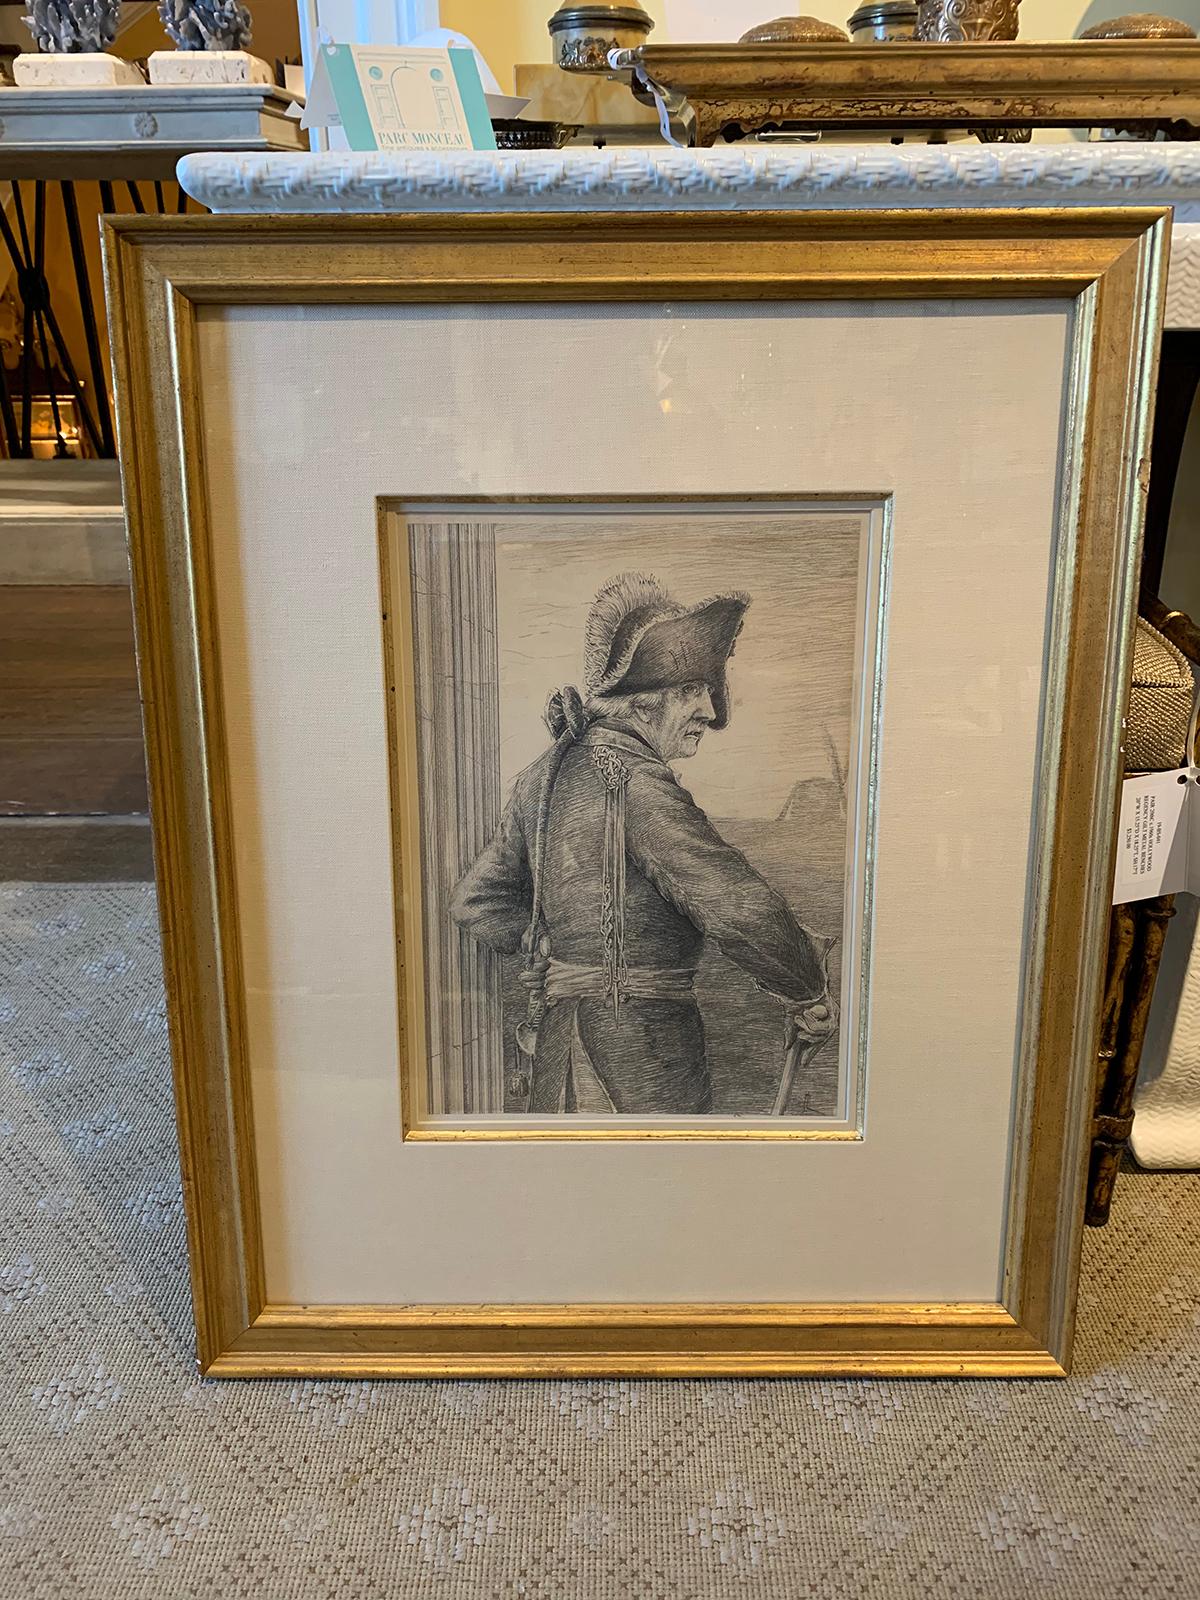 19th century pencil drawing of French soldier, unsigned.